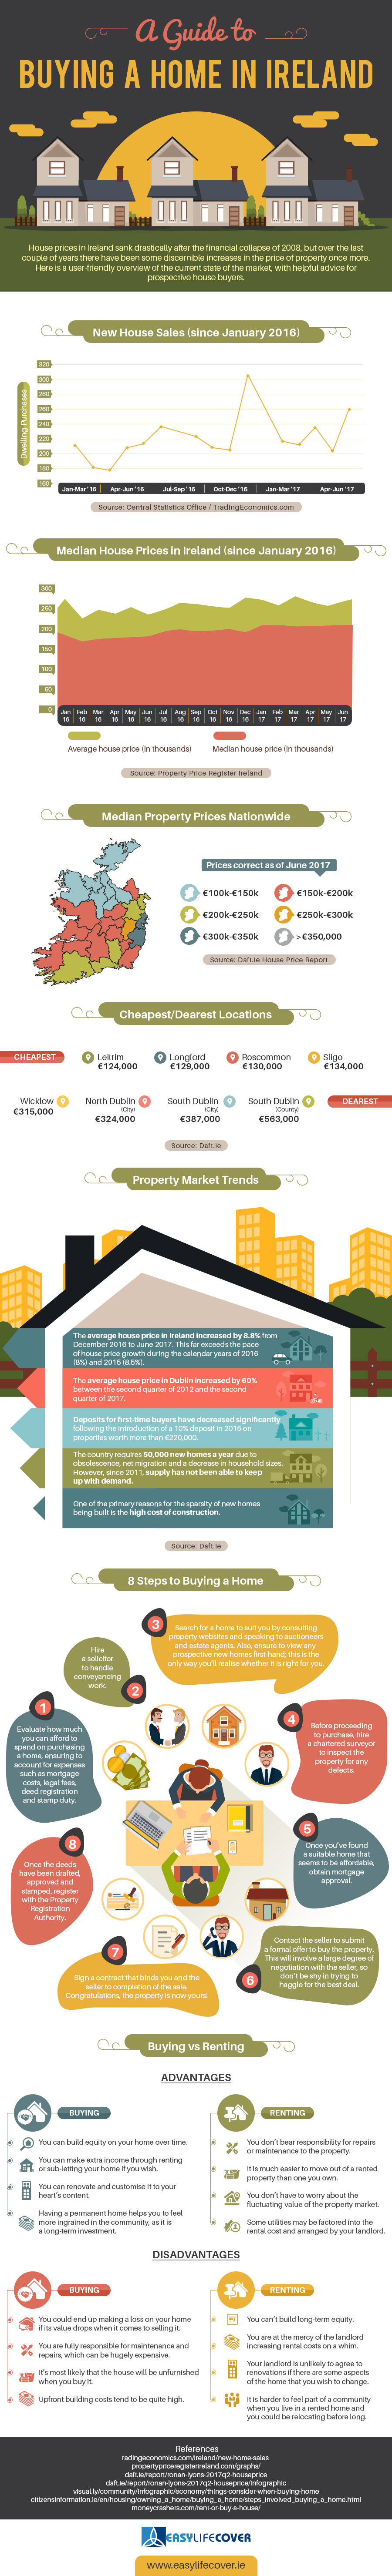 A-Guide-to-Buying-a-Home-in-Ireland-Infographic